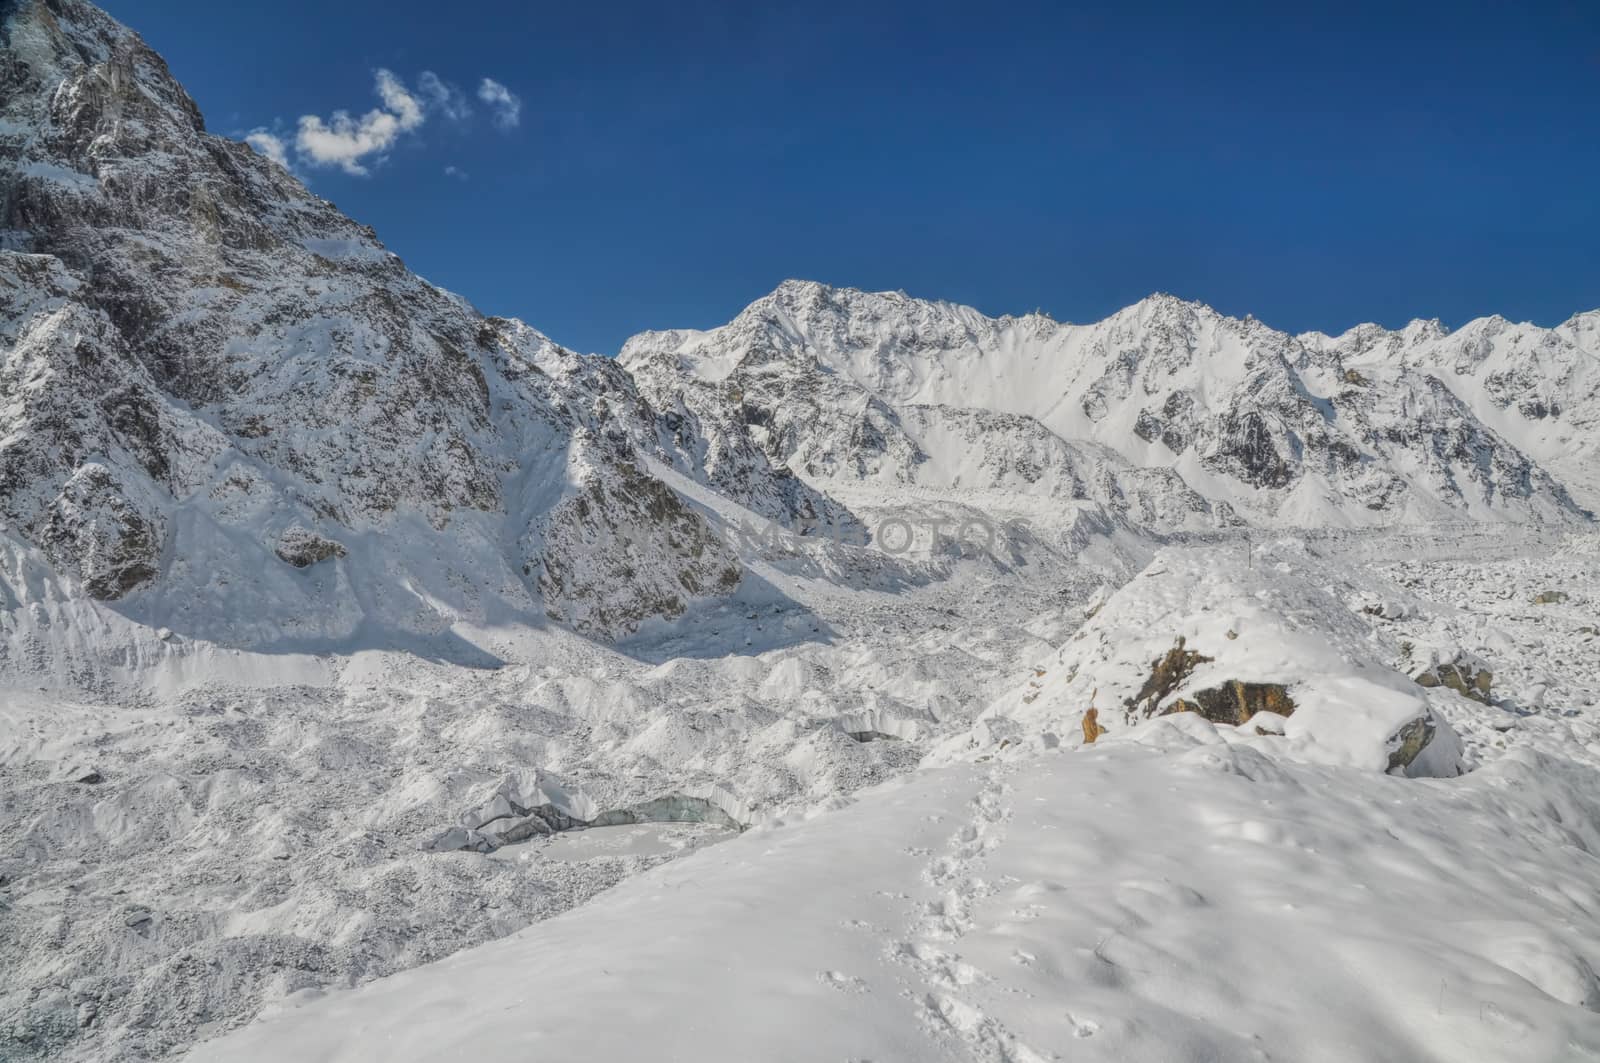 Trekking in scenic Himalayas near Kanchenjunga, the third tallest mountain in the world